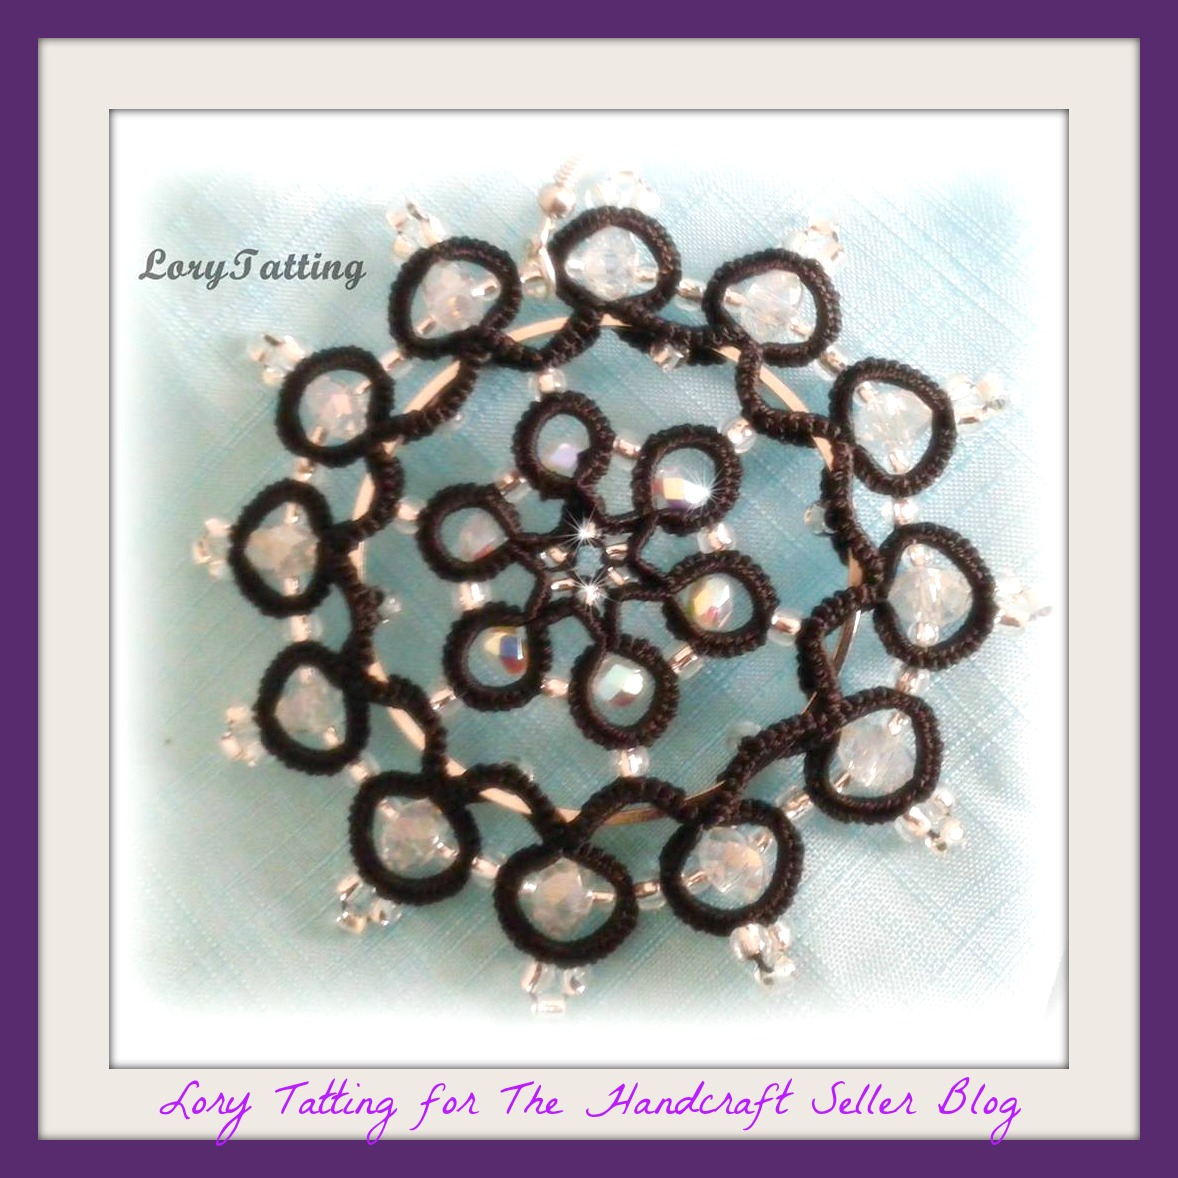 The Handcraft Seller Blog: Tatting from the heart: Lory Tatting...